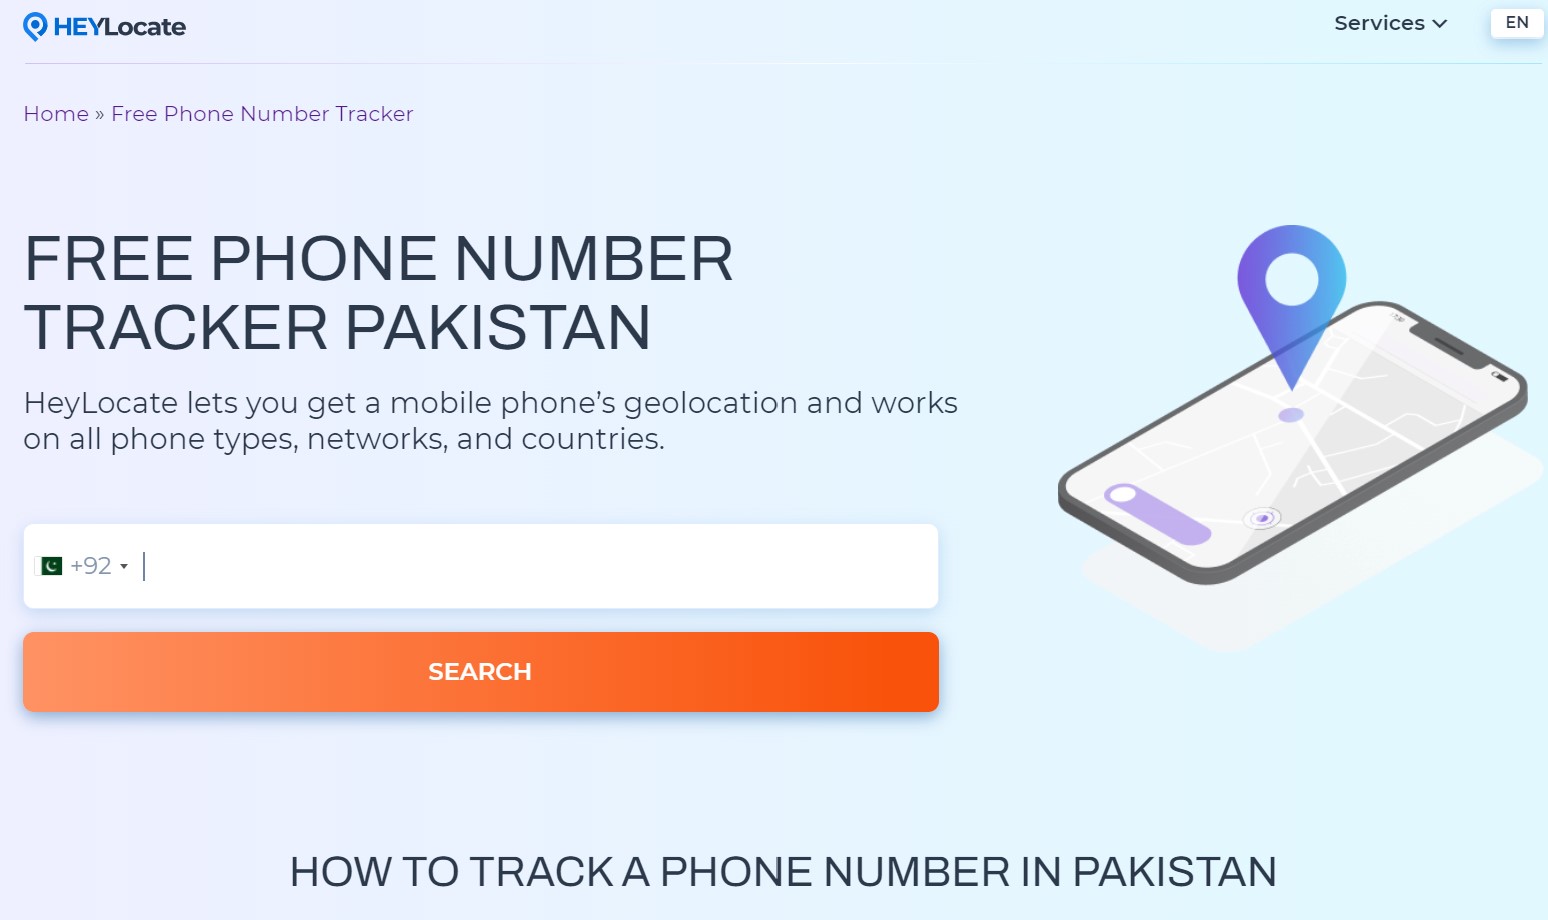 HeyLocate Free phone number tracker Pakistan homepage with a form to enter phone number with Pakistan phone country code